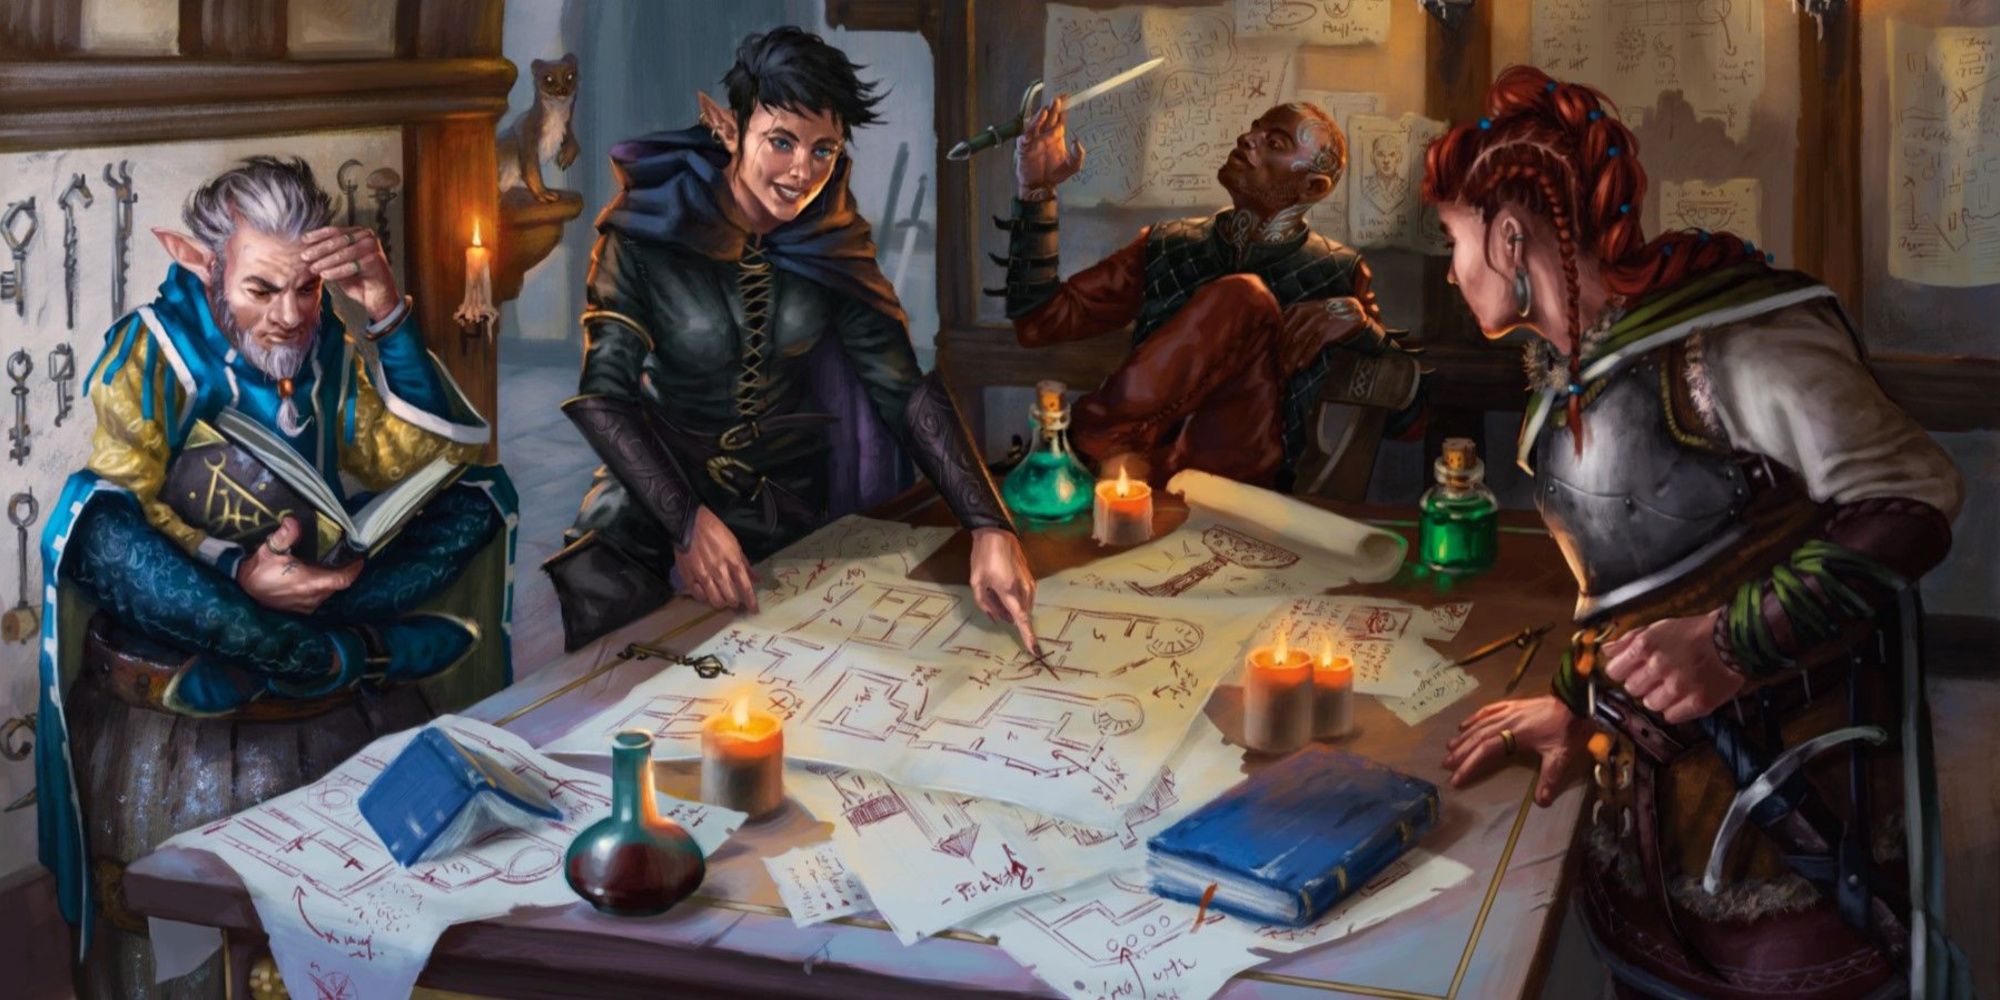 Four DND characters crowd around a table covered in papers and diagrams